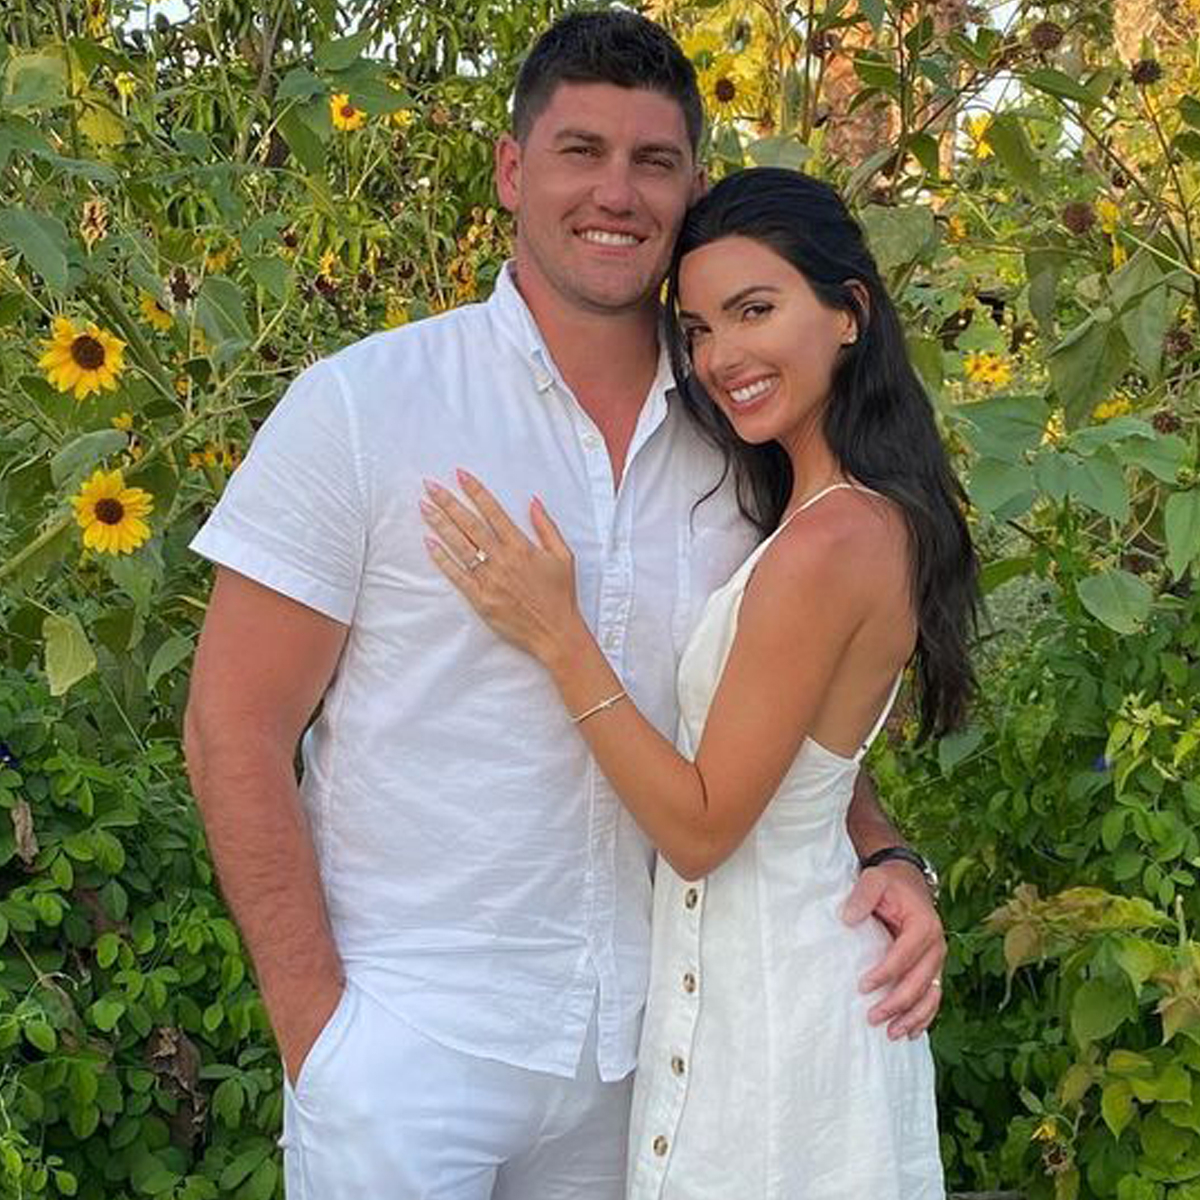 Bachelor Nation Alum Reacts After Husband Catches Aaron Judge Ball